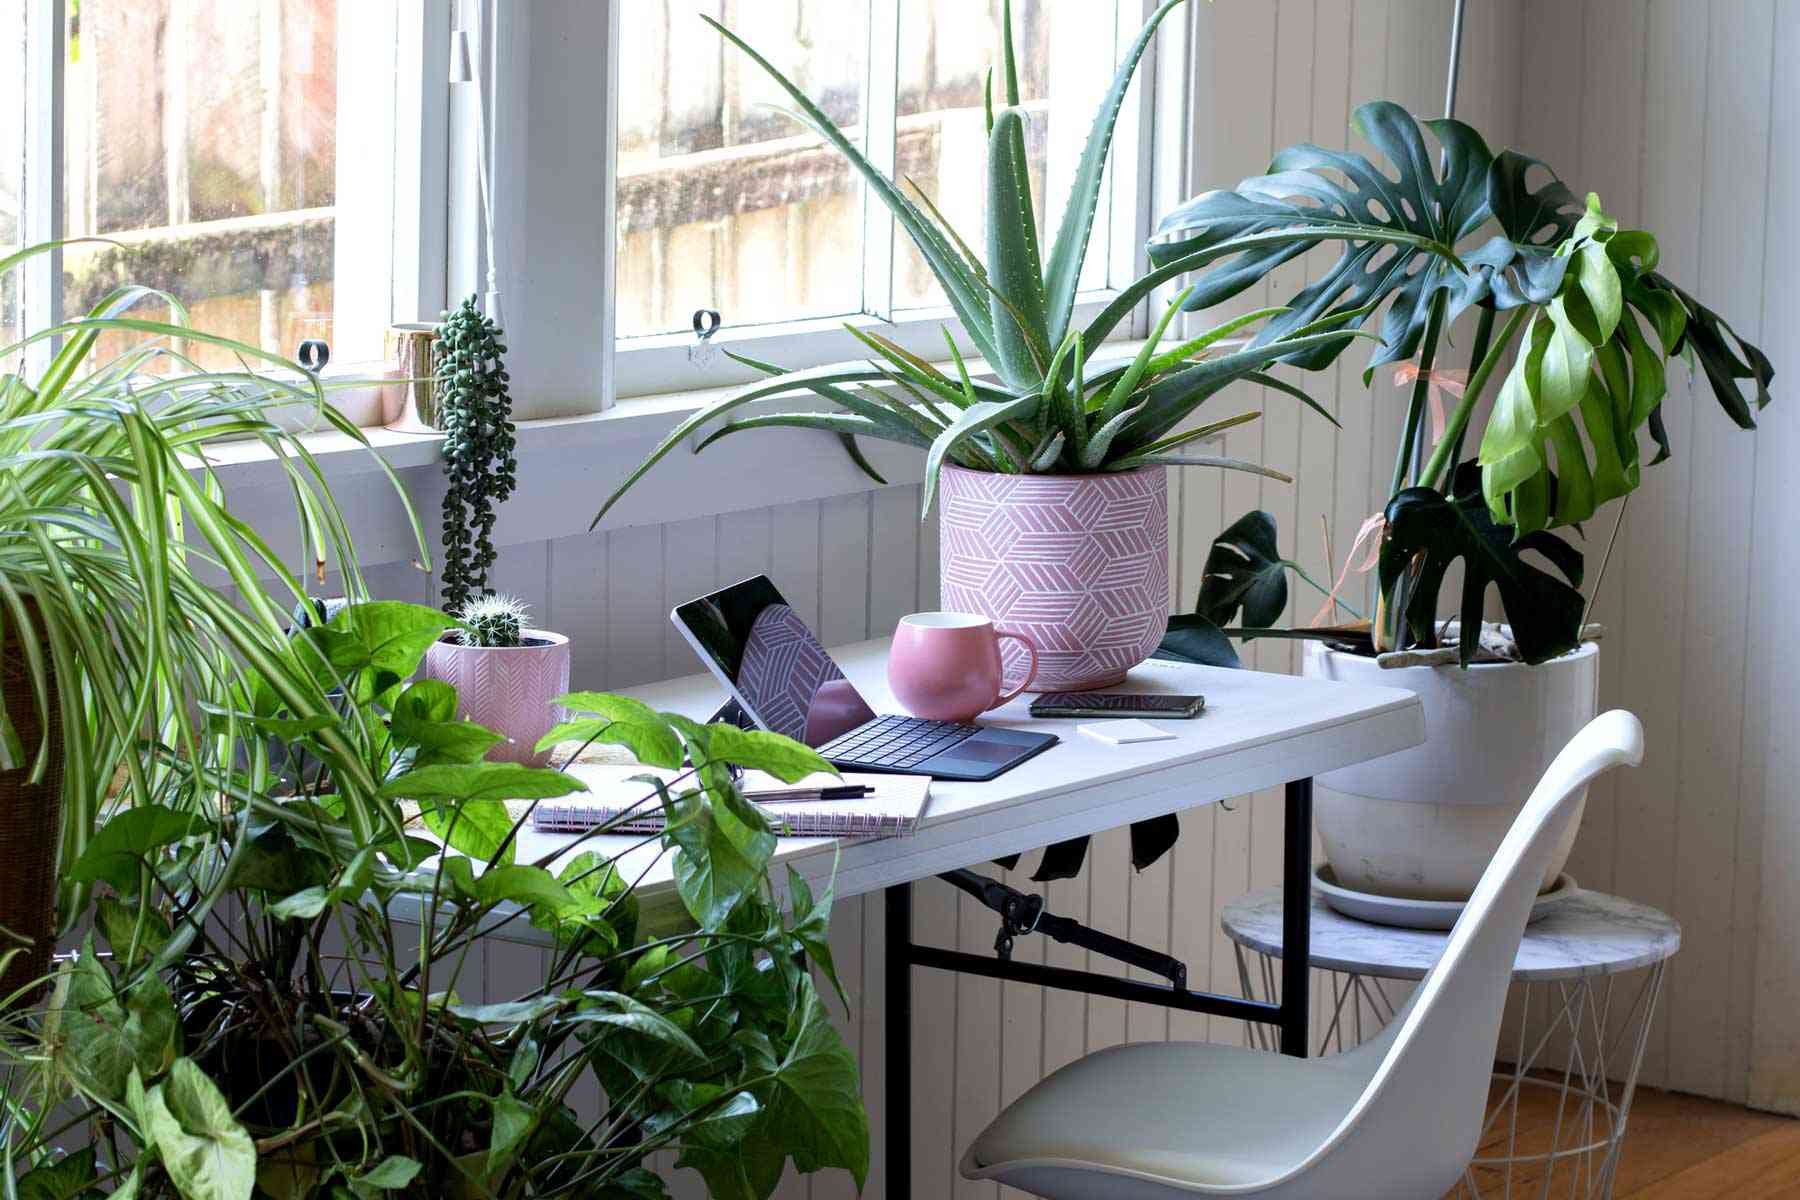 Help Your New Houseplants Thrive With Spotify's Curated Plant Playlists